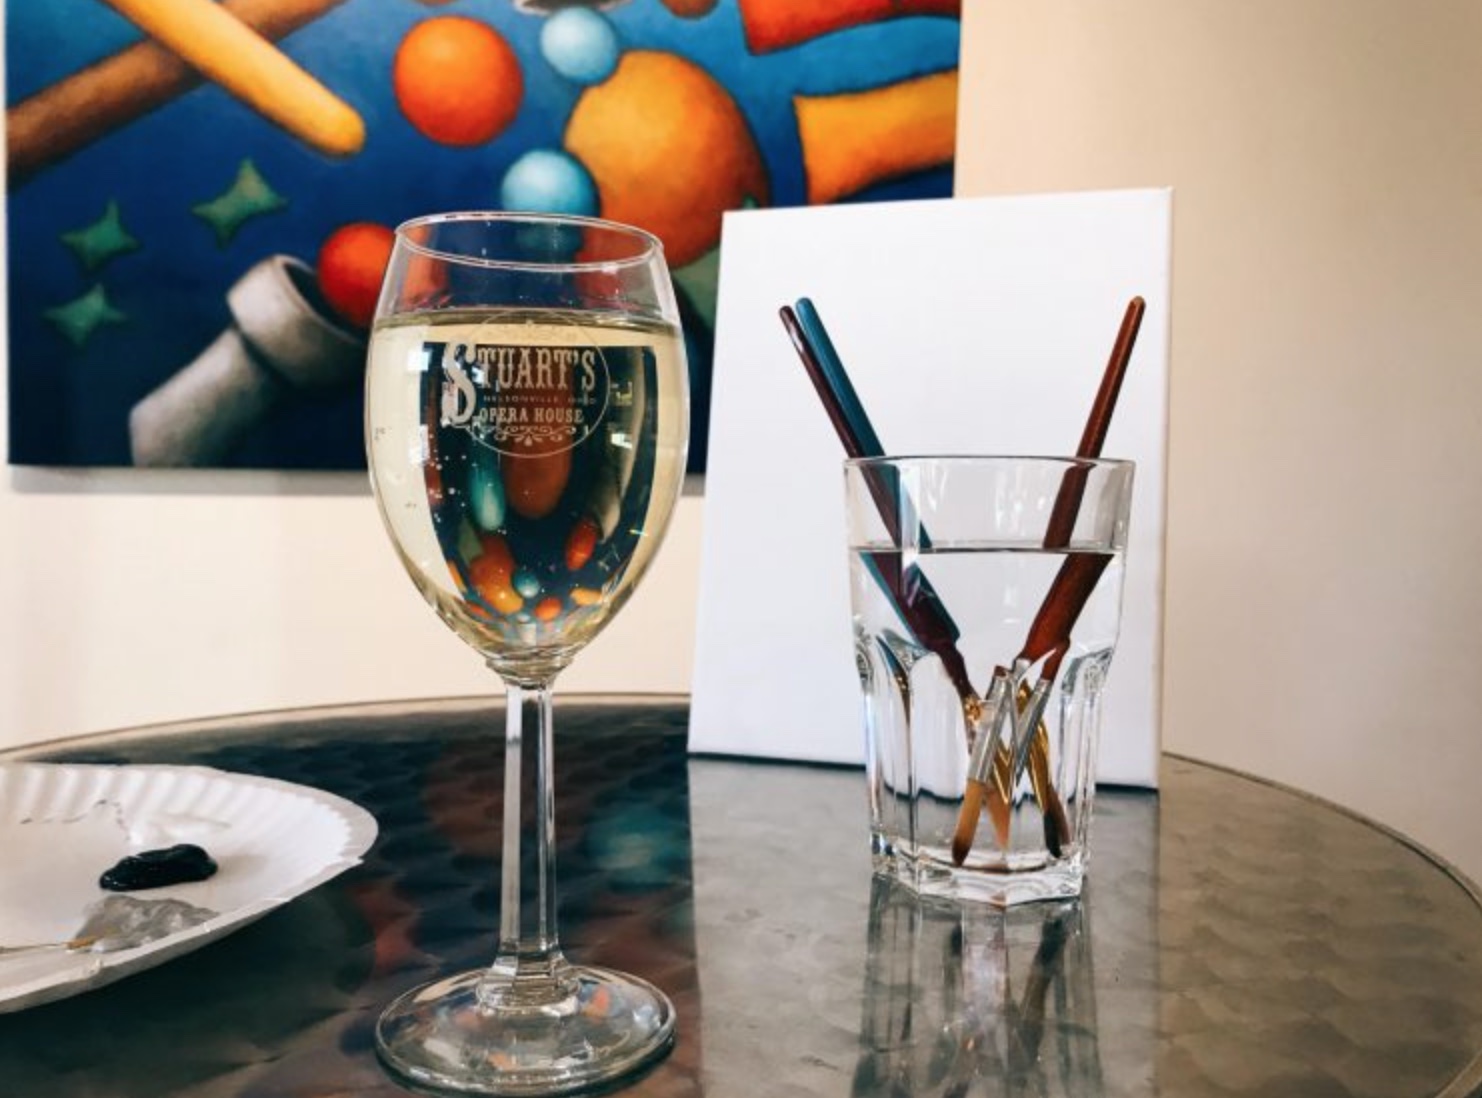 An image of a wine glass next to a glass with paintbrushes